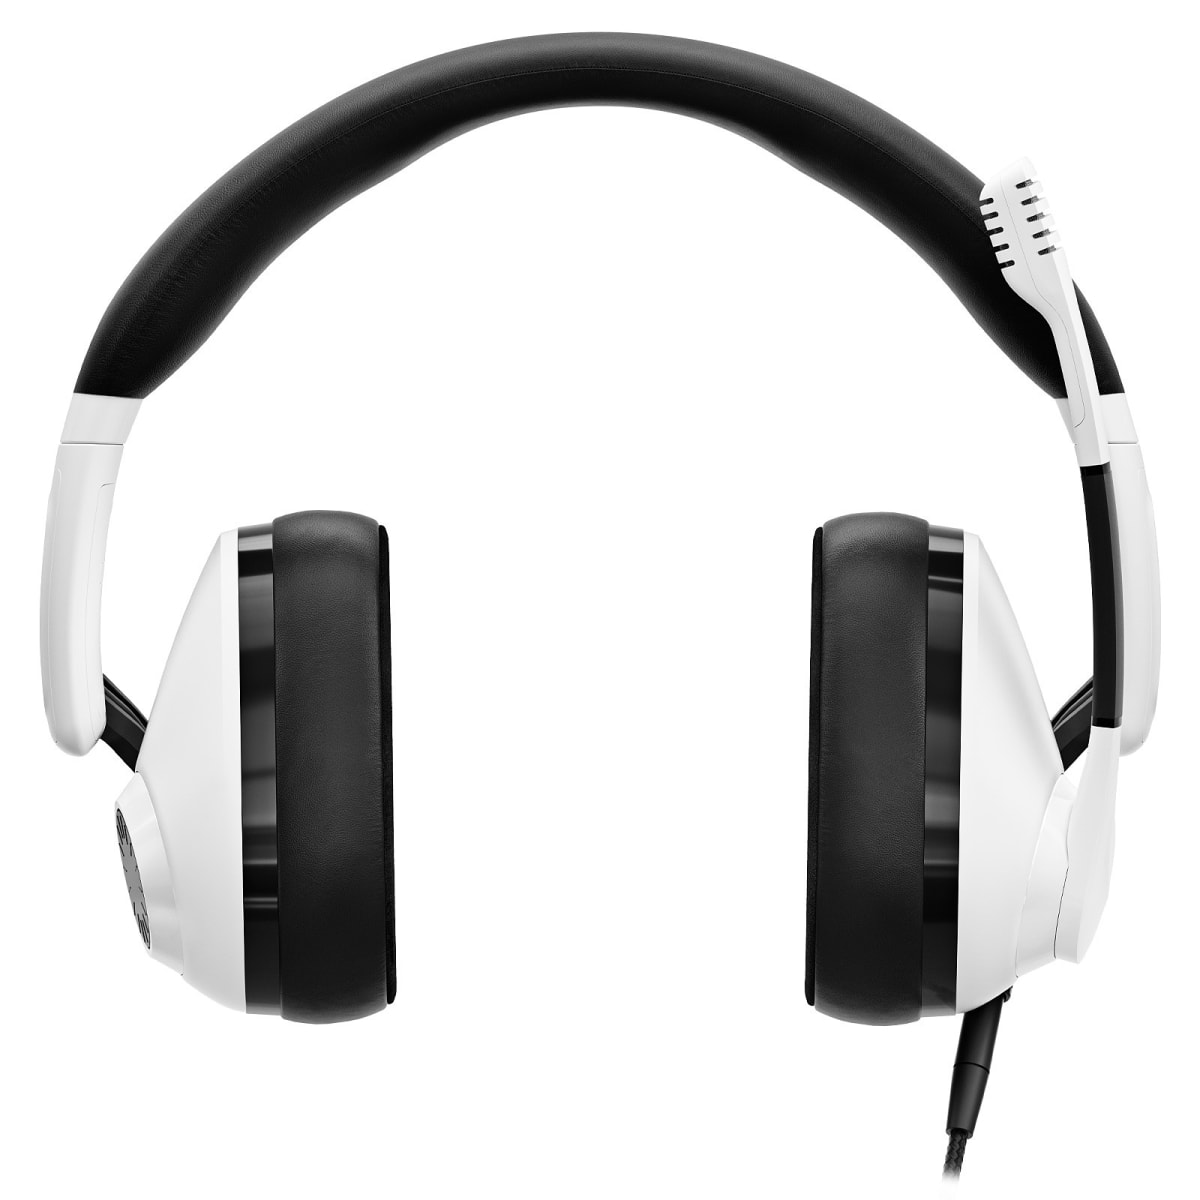 EPOS 1000889 H3 WHITE, Over-ear Headset Weiß Gaming